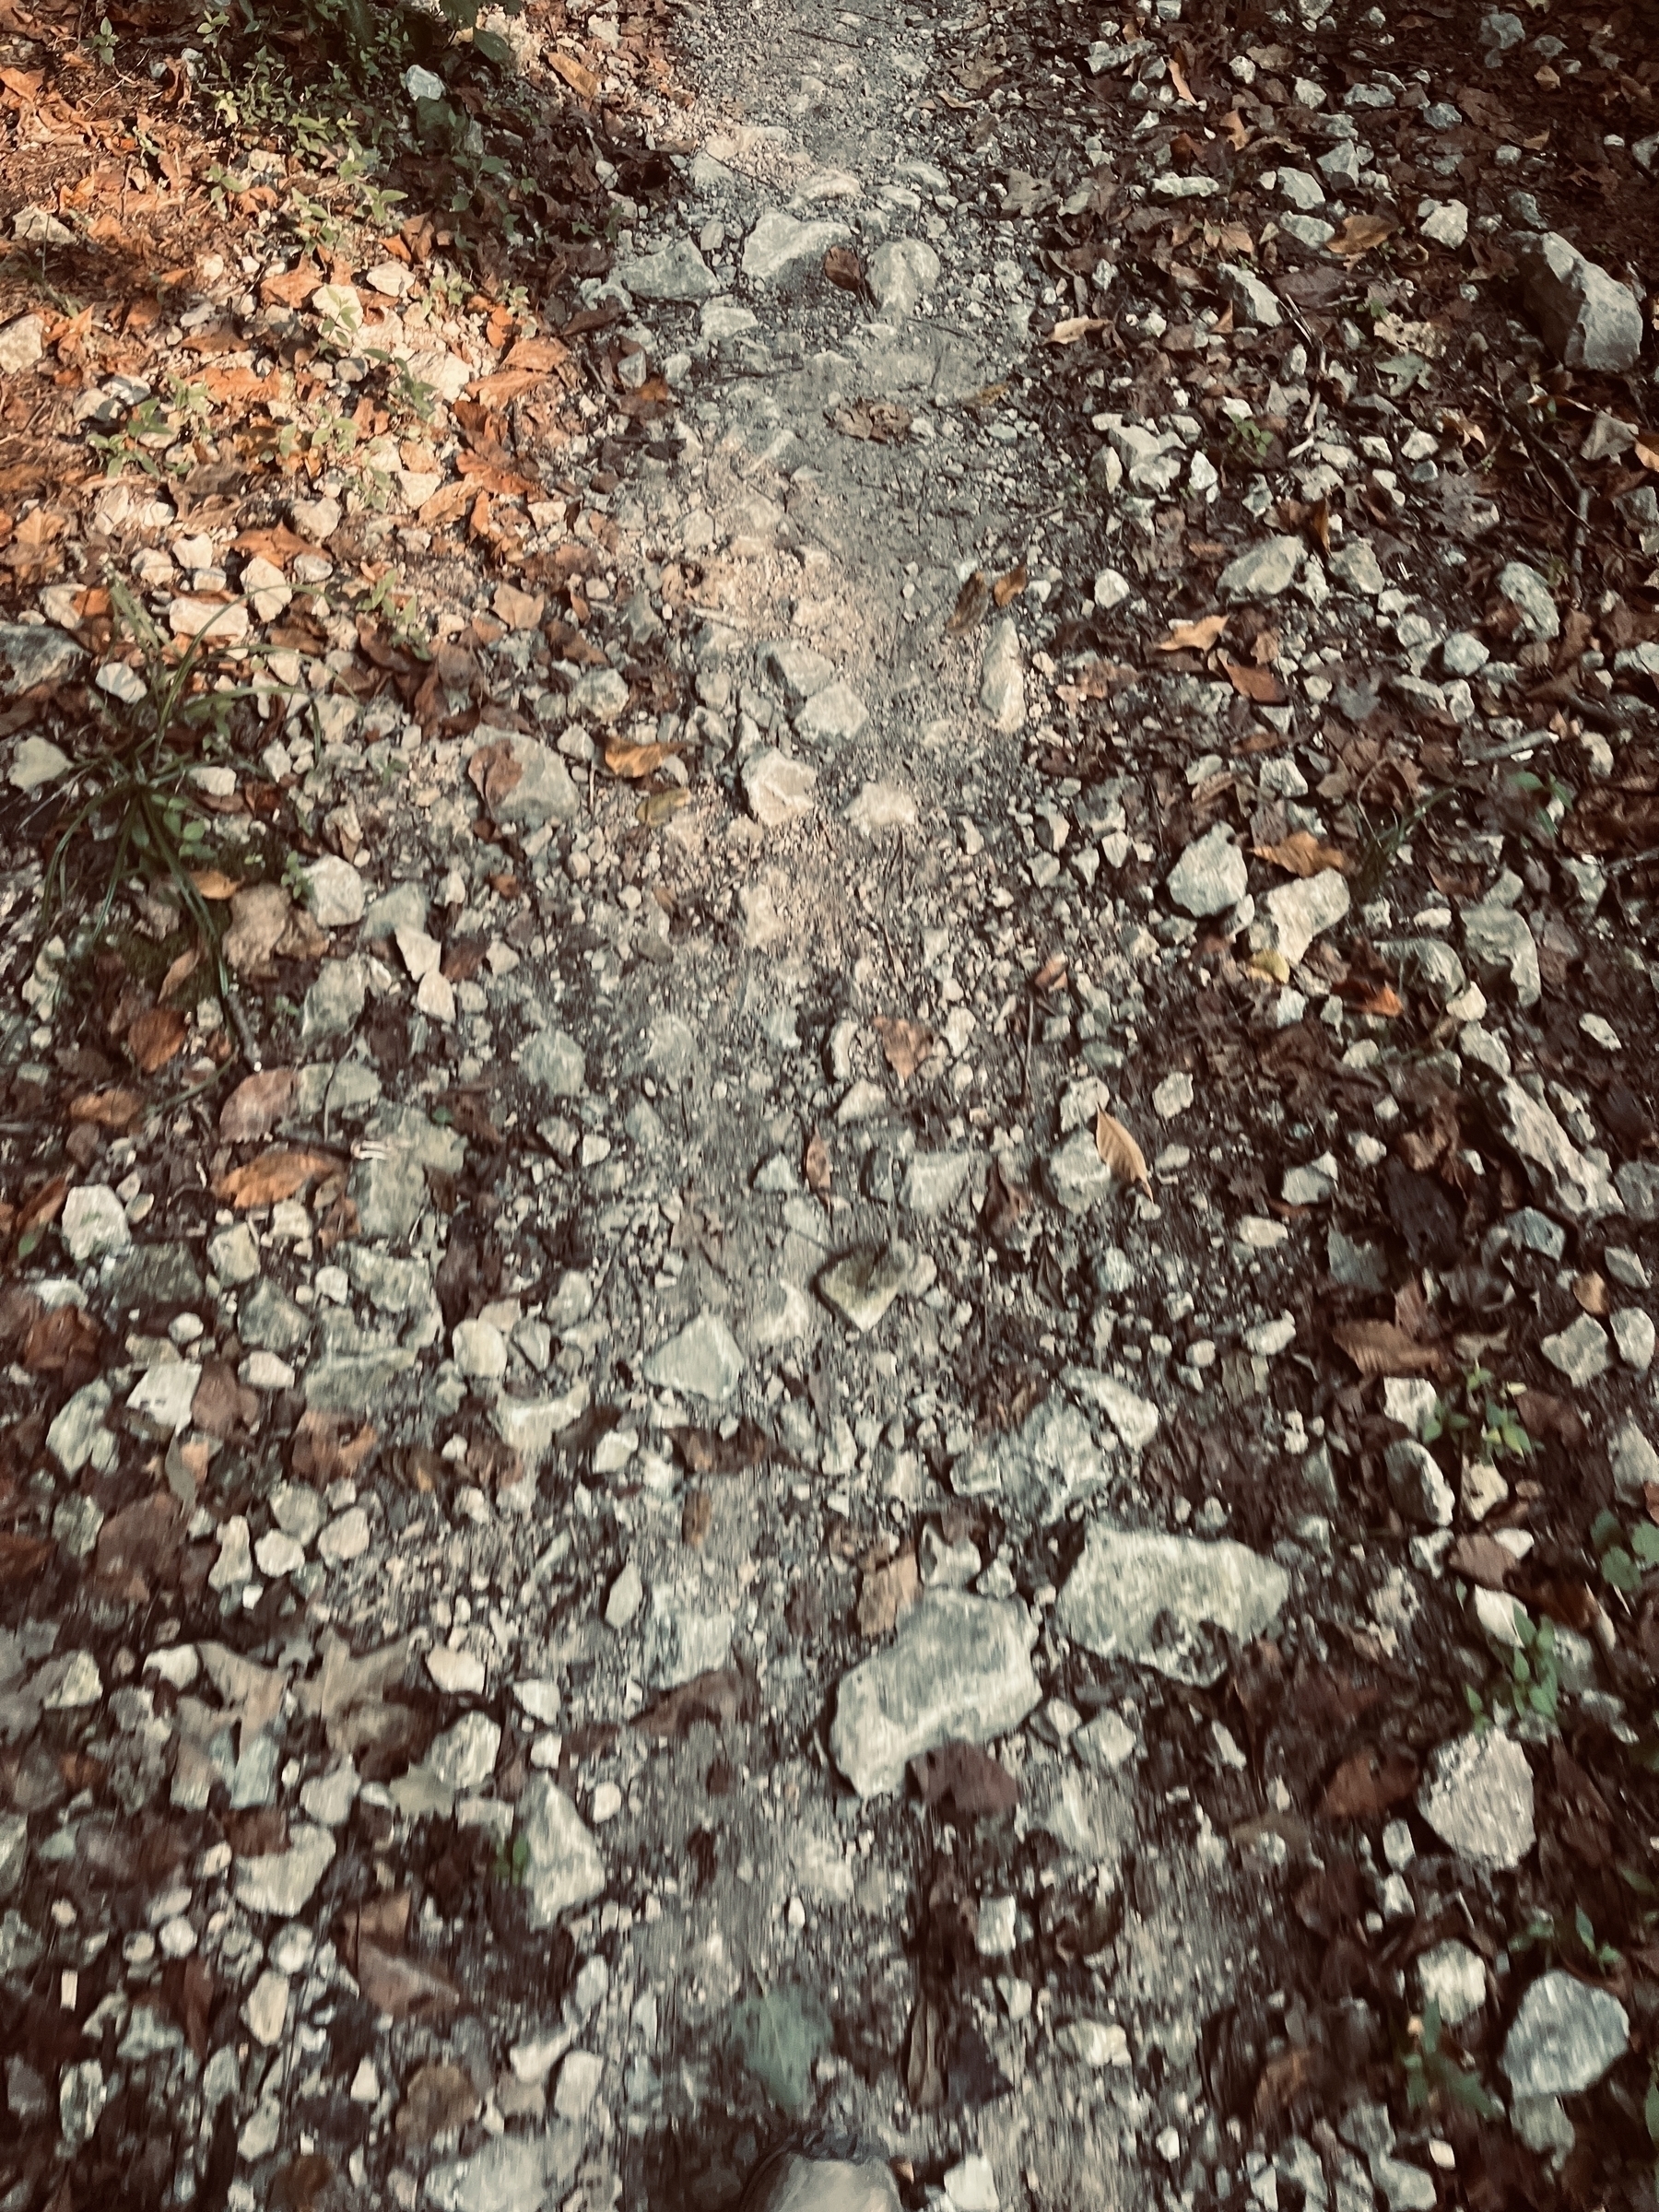 A dirt and gravel path